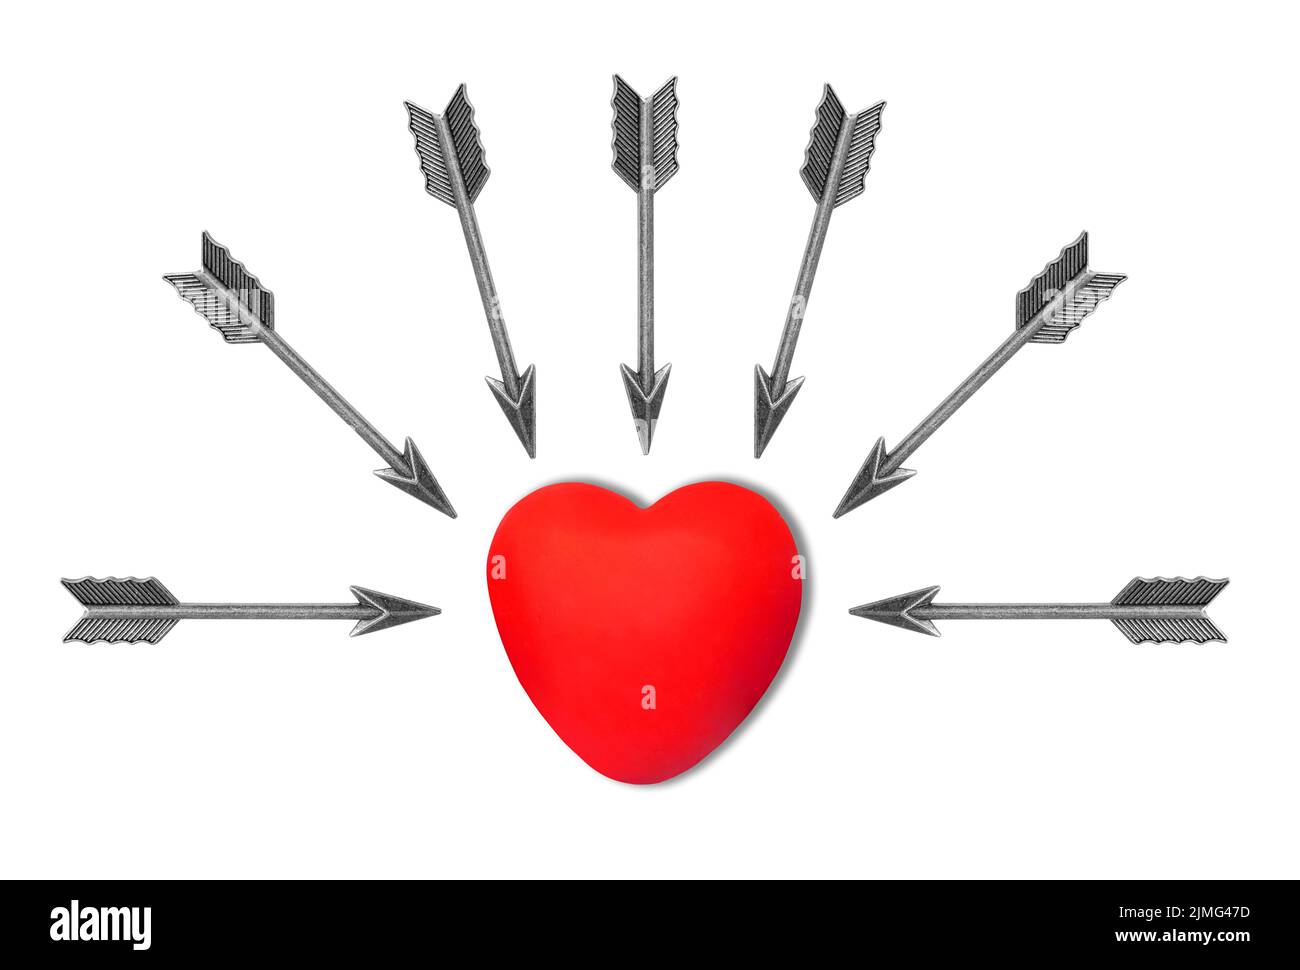 Group of steel bow arrows aimed at a red heart on a white background. Heart attack risk factors. Stock Photo